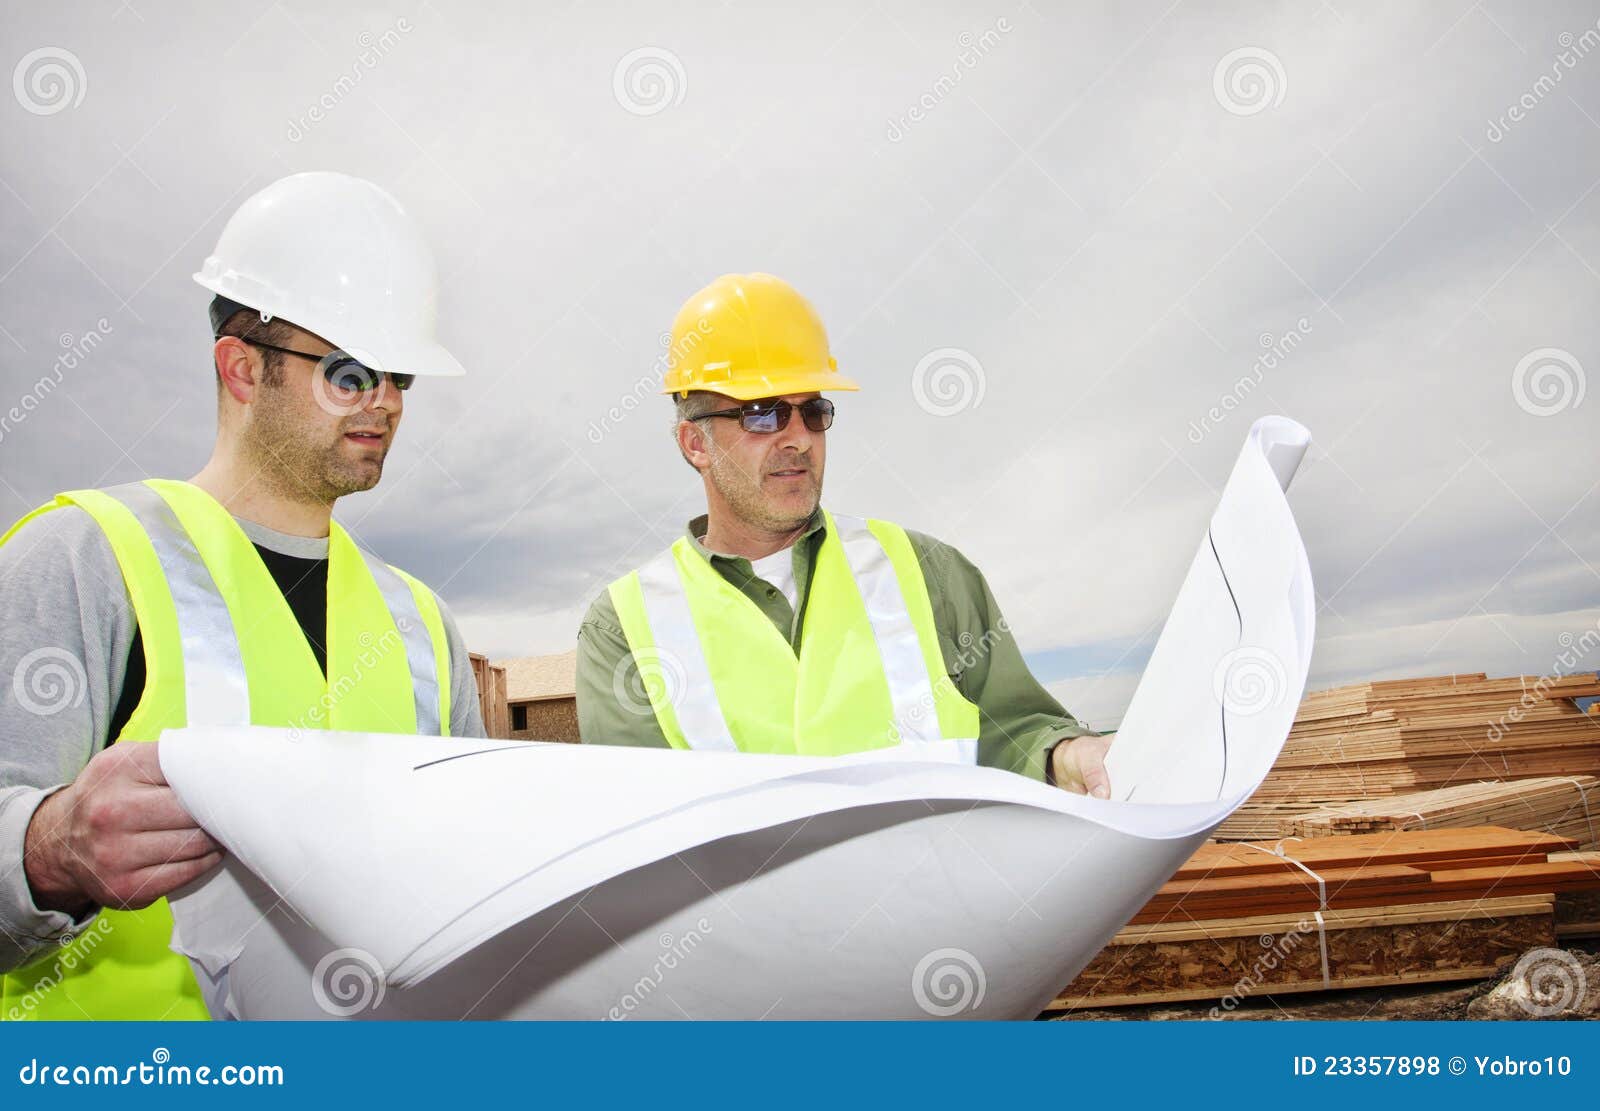 workers-reading-construction-plans-23357898.jpg